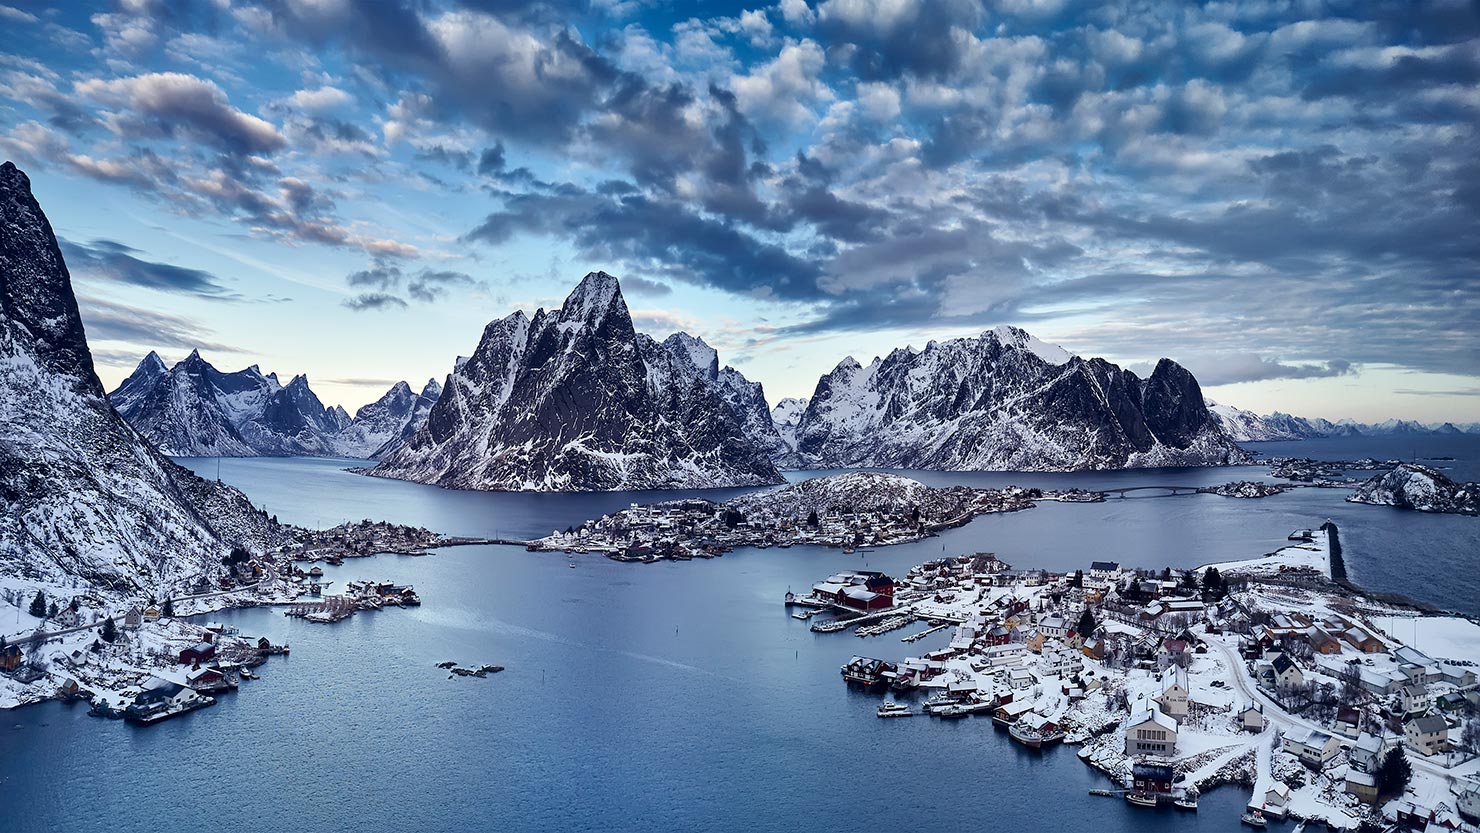 Lofoten Norway Reine Winter North Arctic Drone Aerial Plane Helicopter Heli Photography Licensed FAA Part 107 CAA PfCO Commercial Operations Hire Commission Paul Reiffer Professional